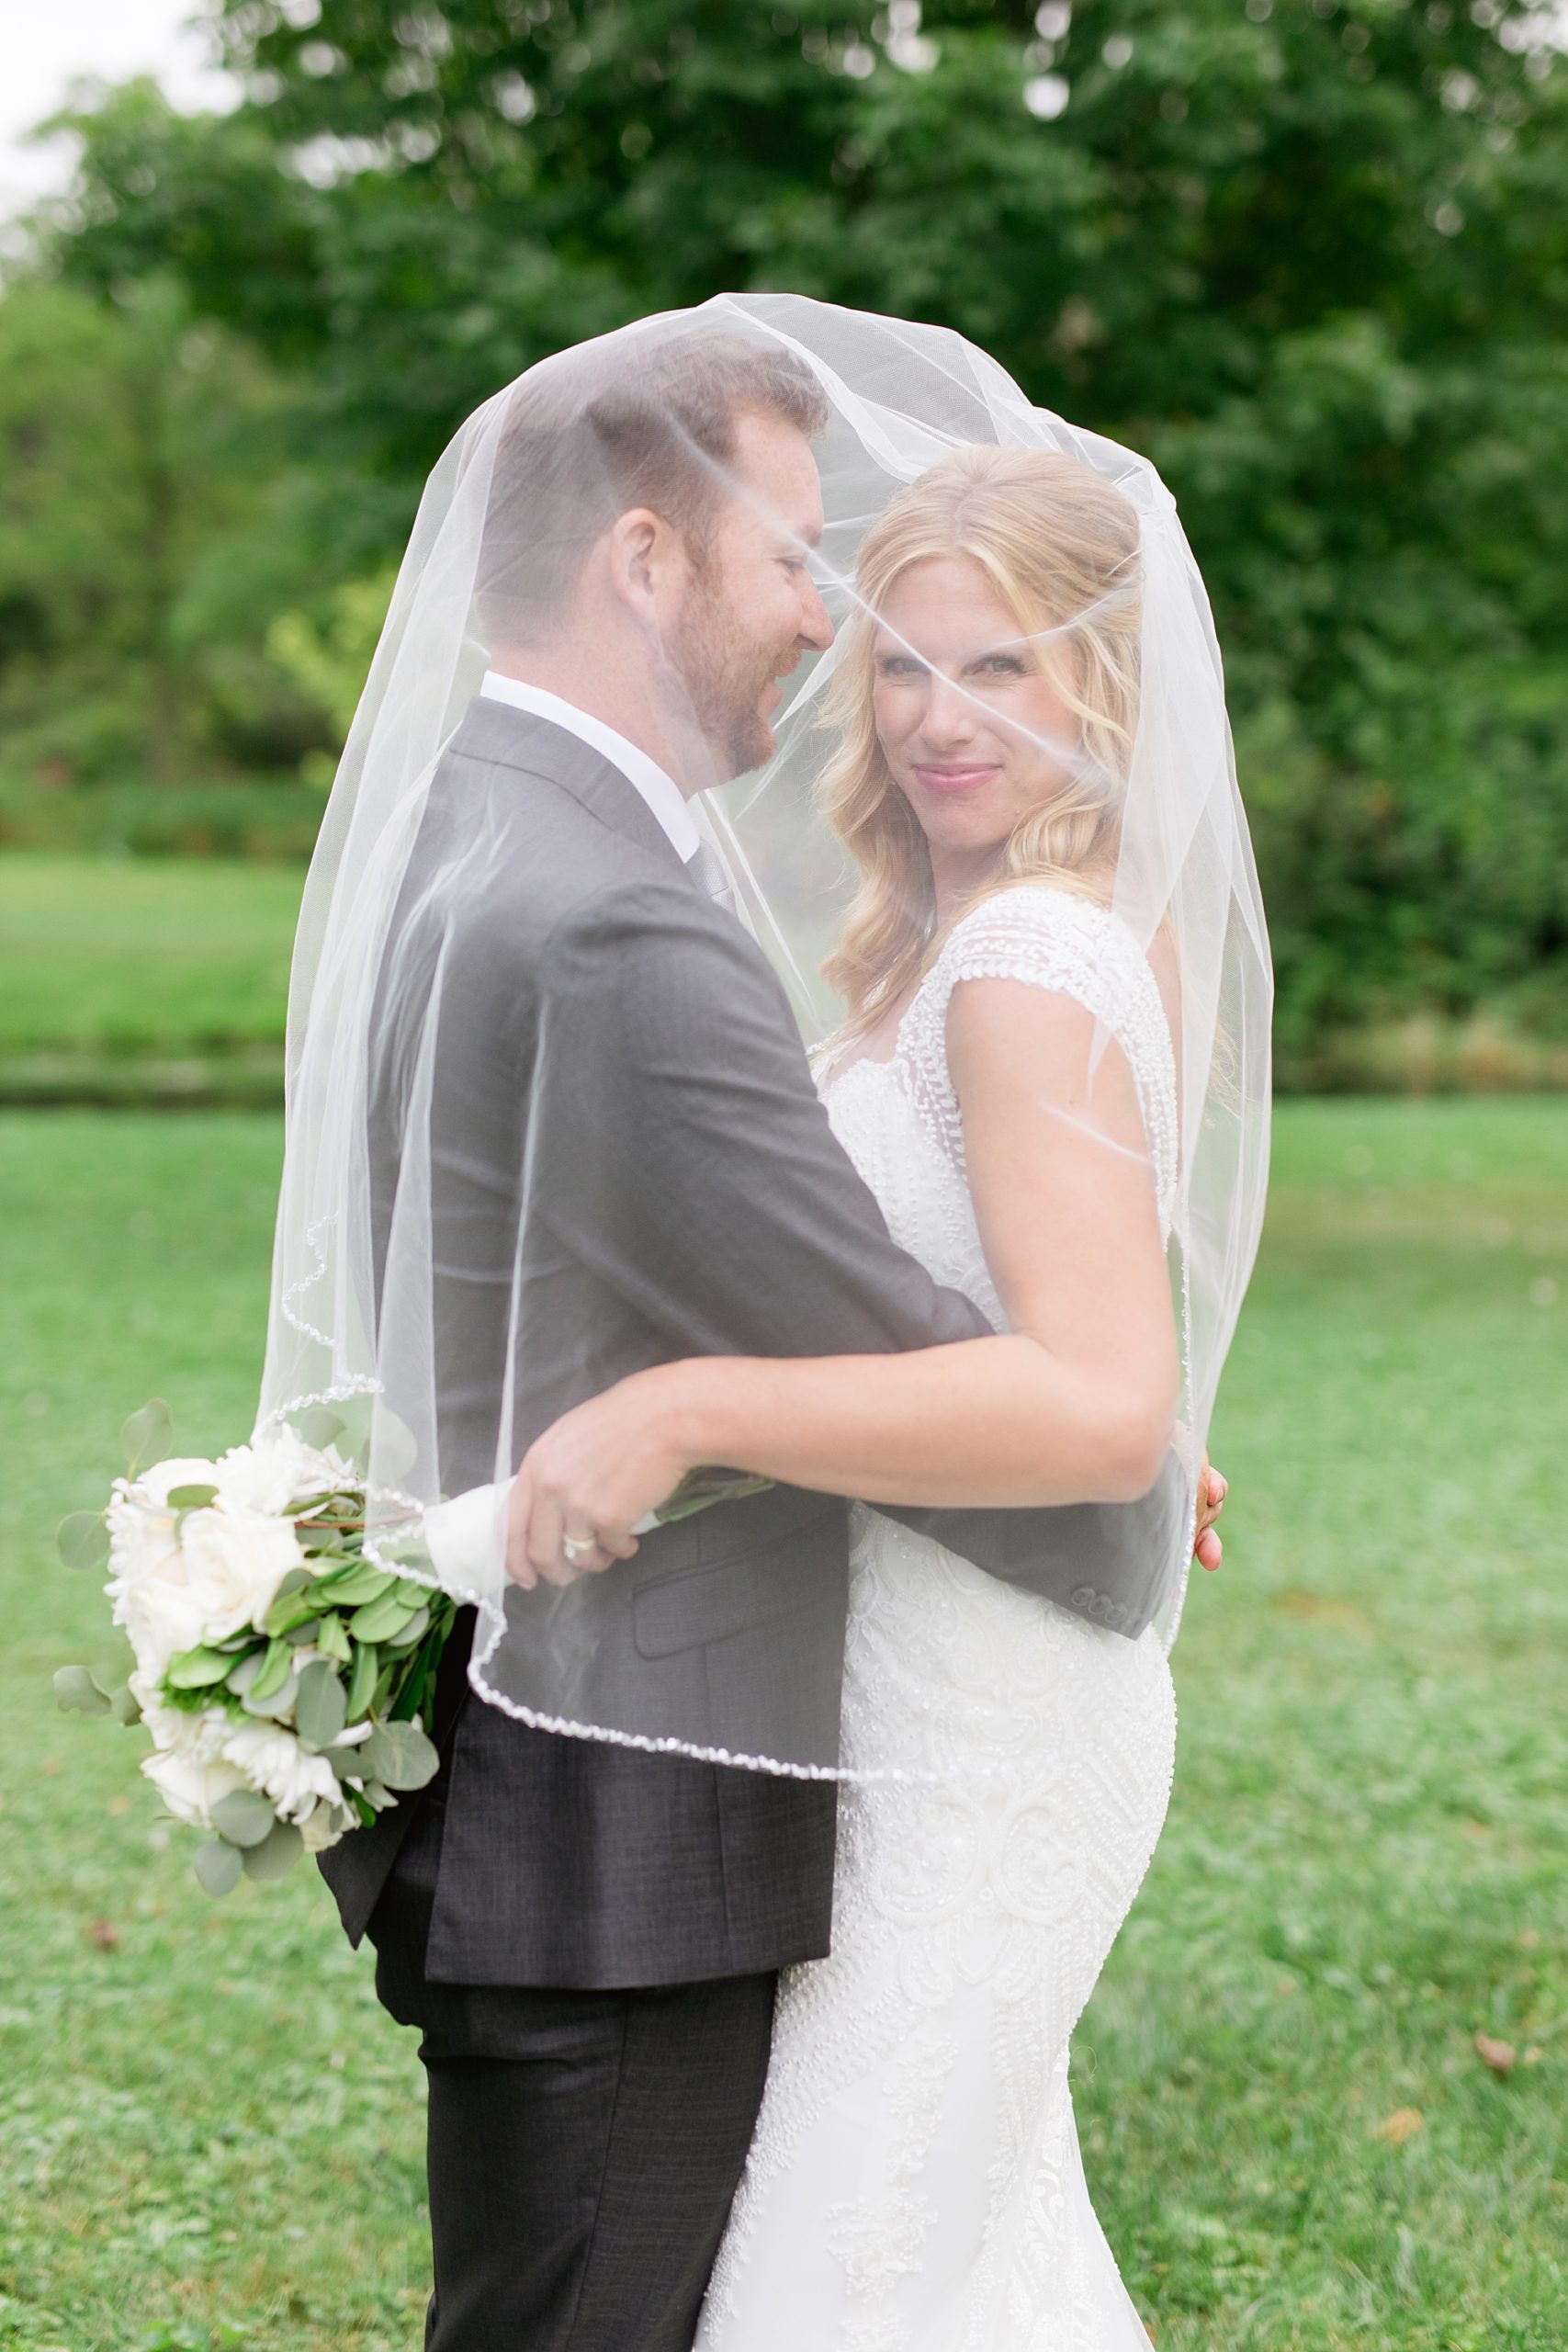 Bride and groom veil shot from outdoor tented wedding by Breanne Rochelle Photography.